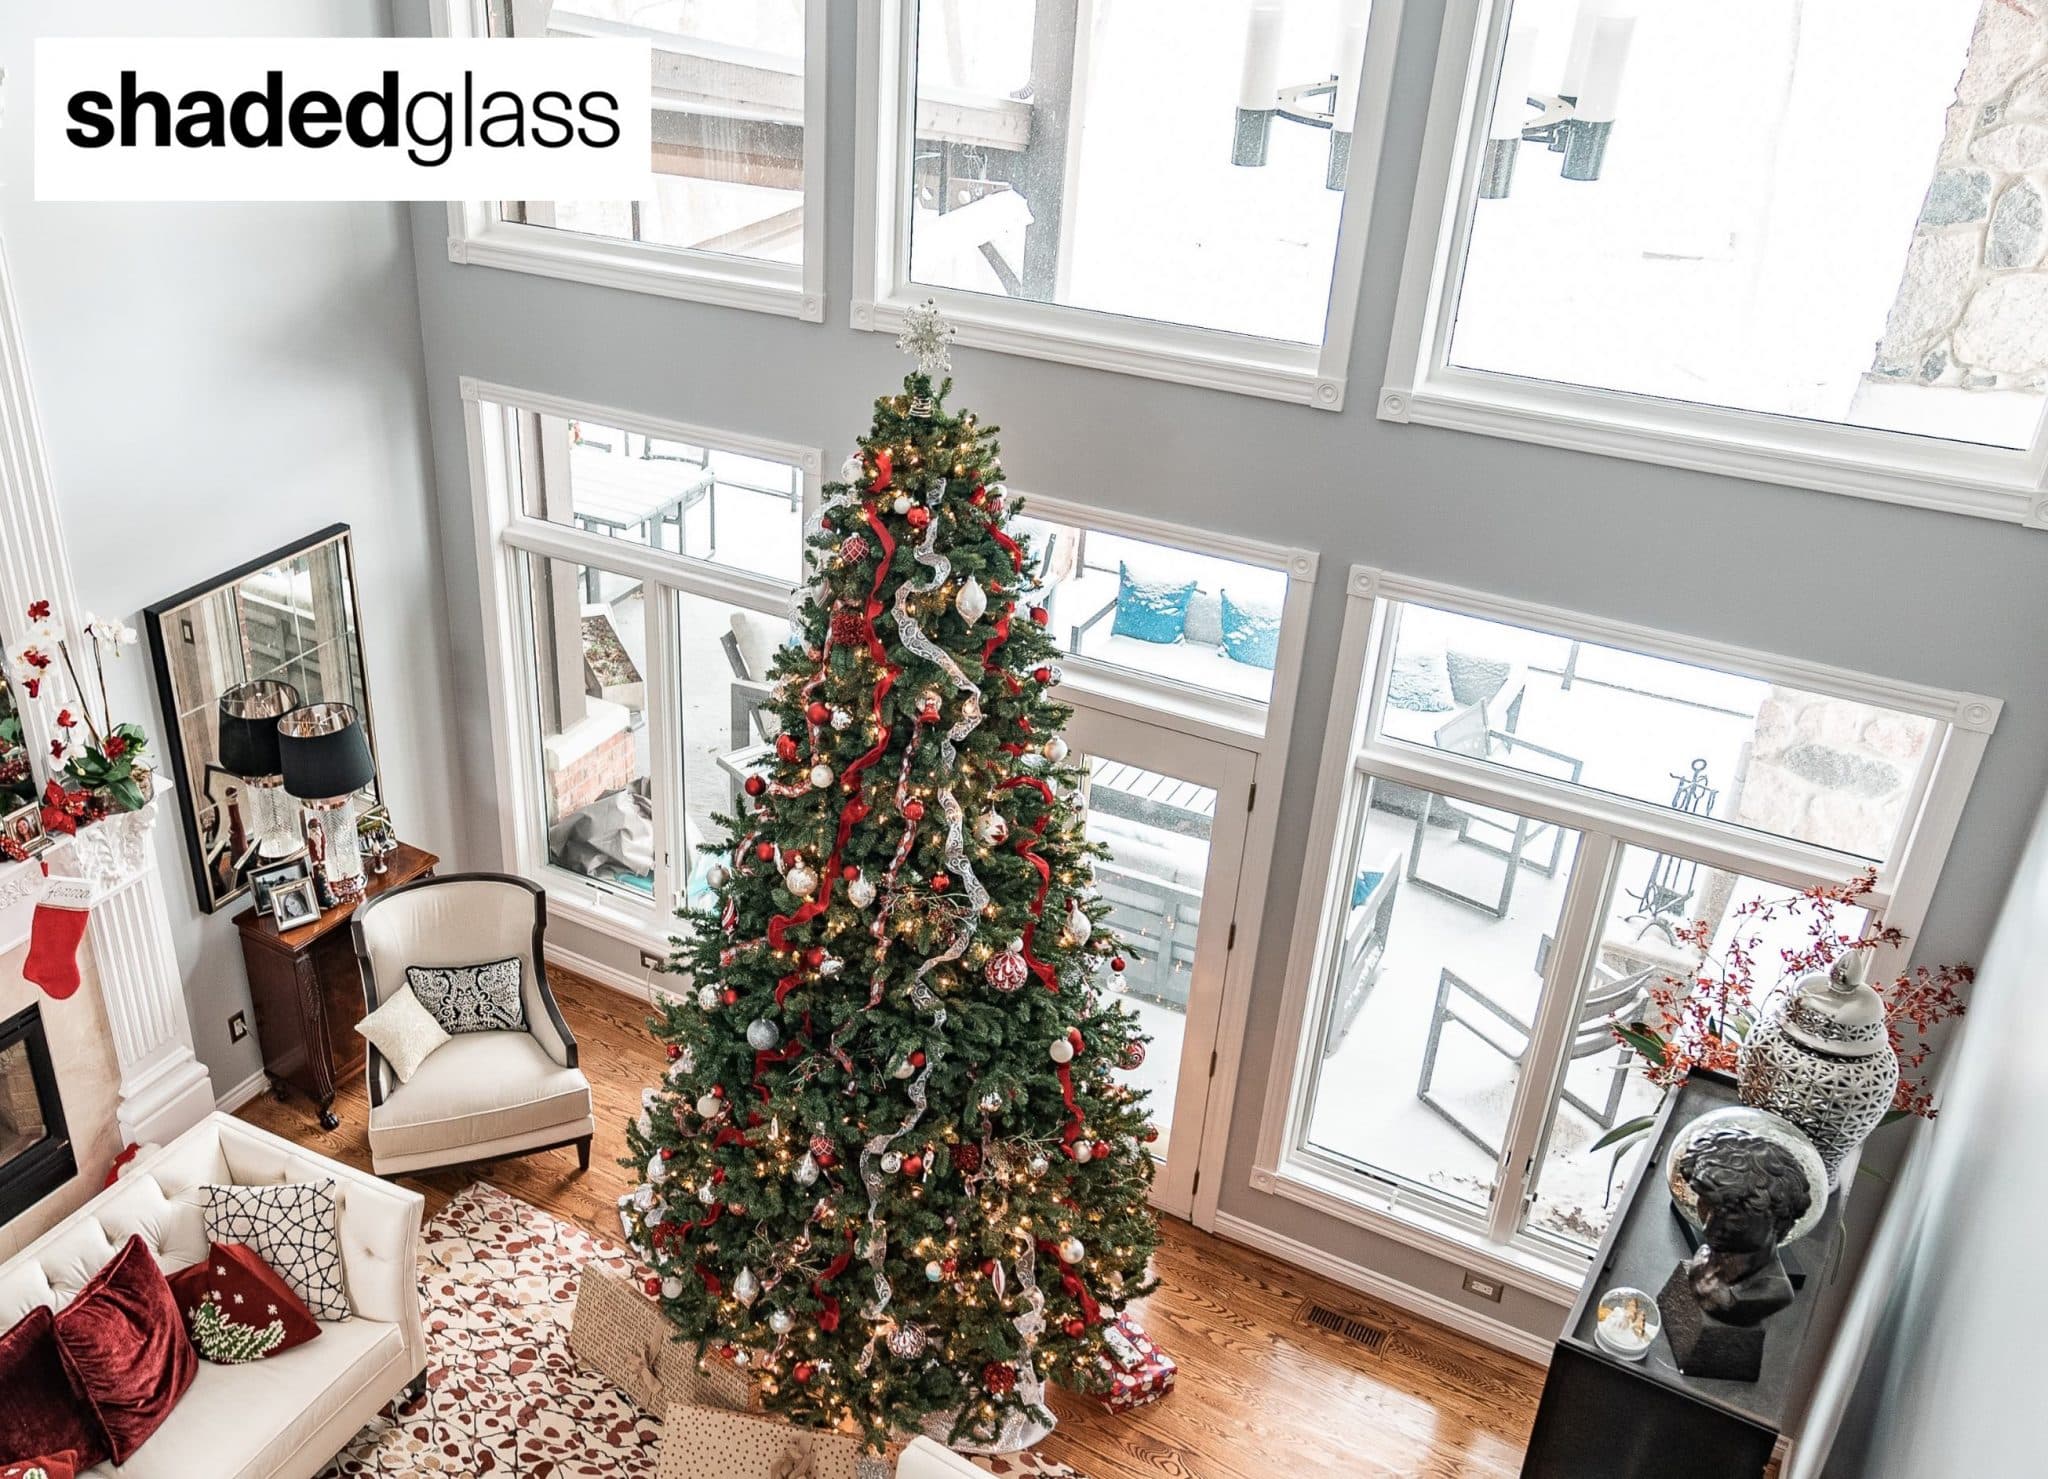 The Perfect Home Gift Might Be A Window Film Retrofit To Existing Glass - Home Window Tinting in the Orem, UT area.